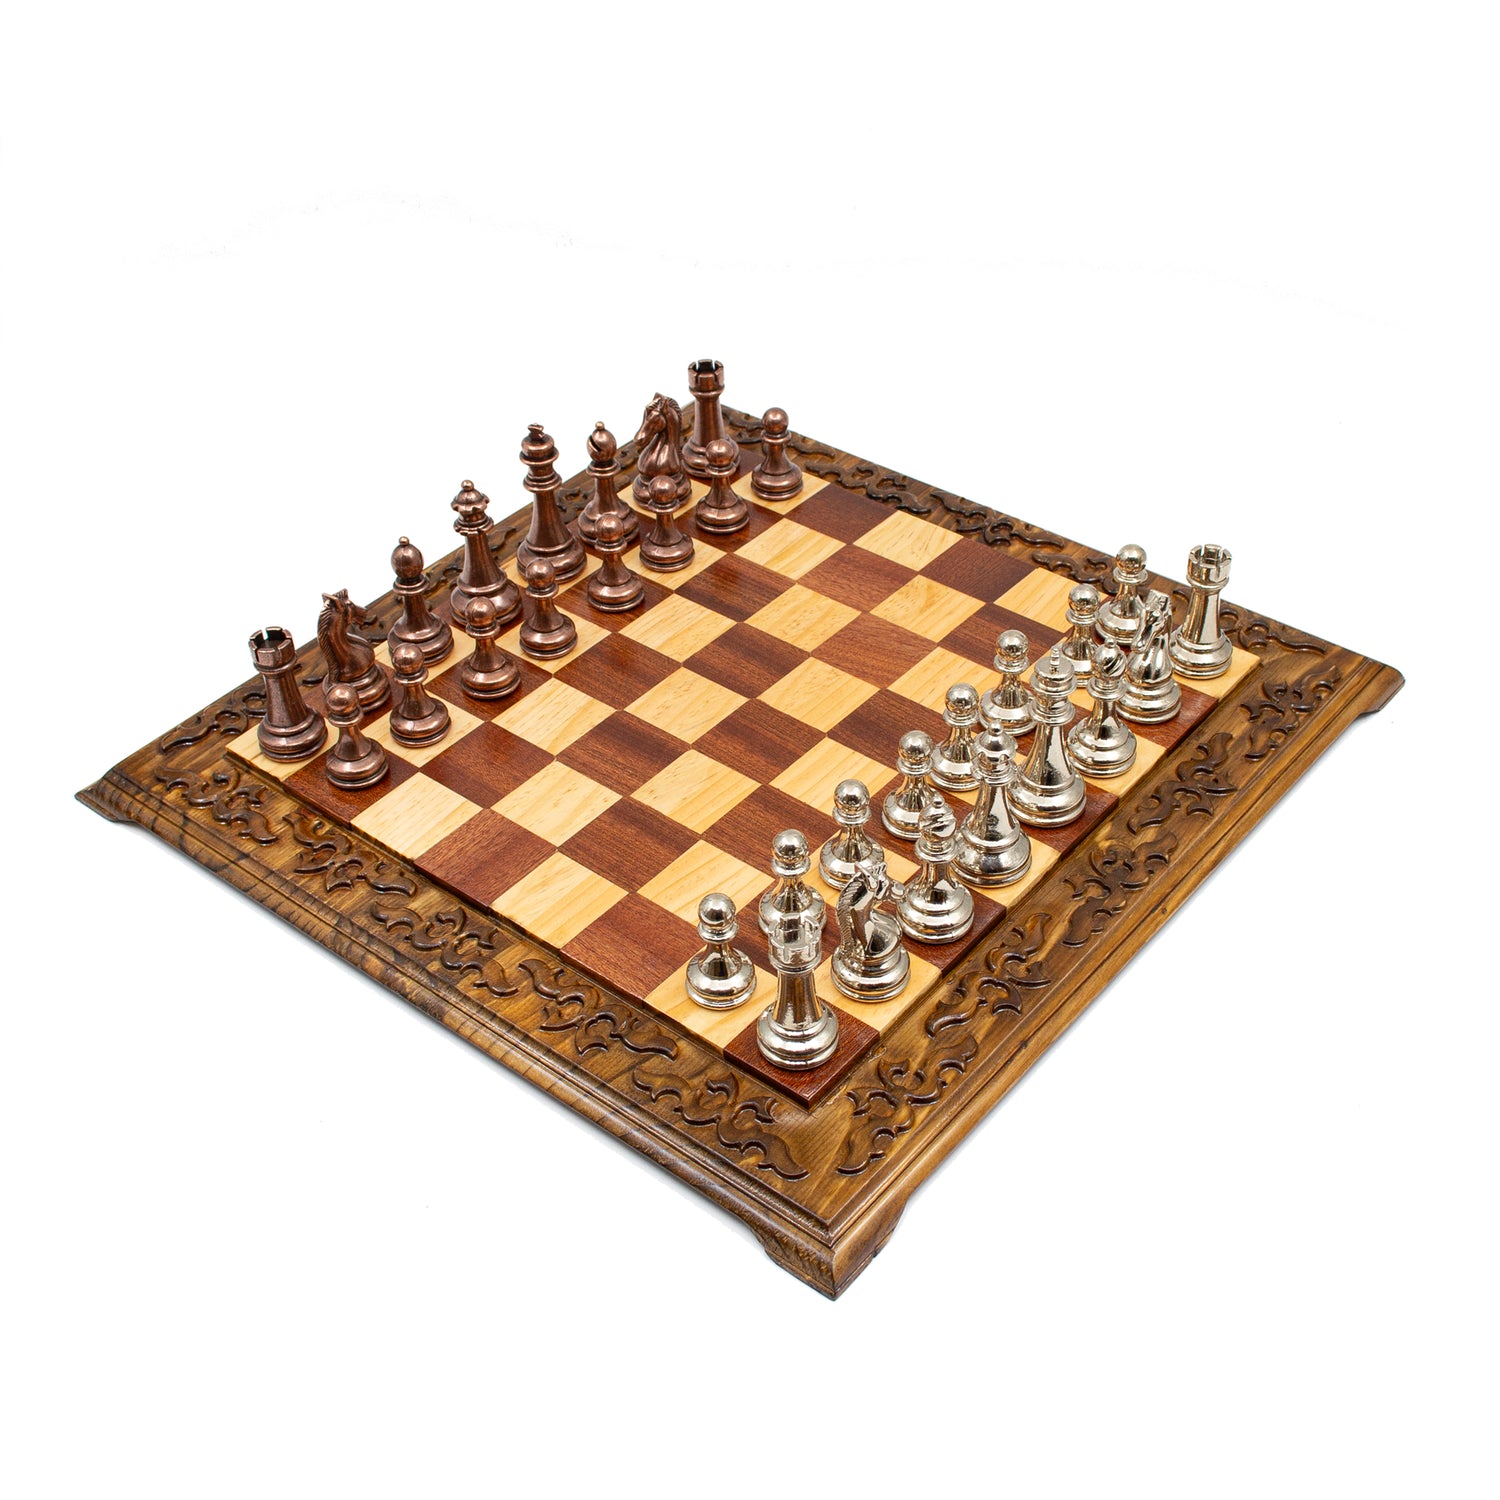 Classic Walnut Chess Set: Hand-Carved with Copper and Silver Pieces - Ketohandcraft